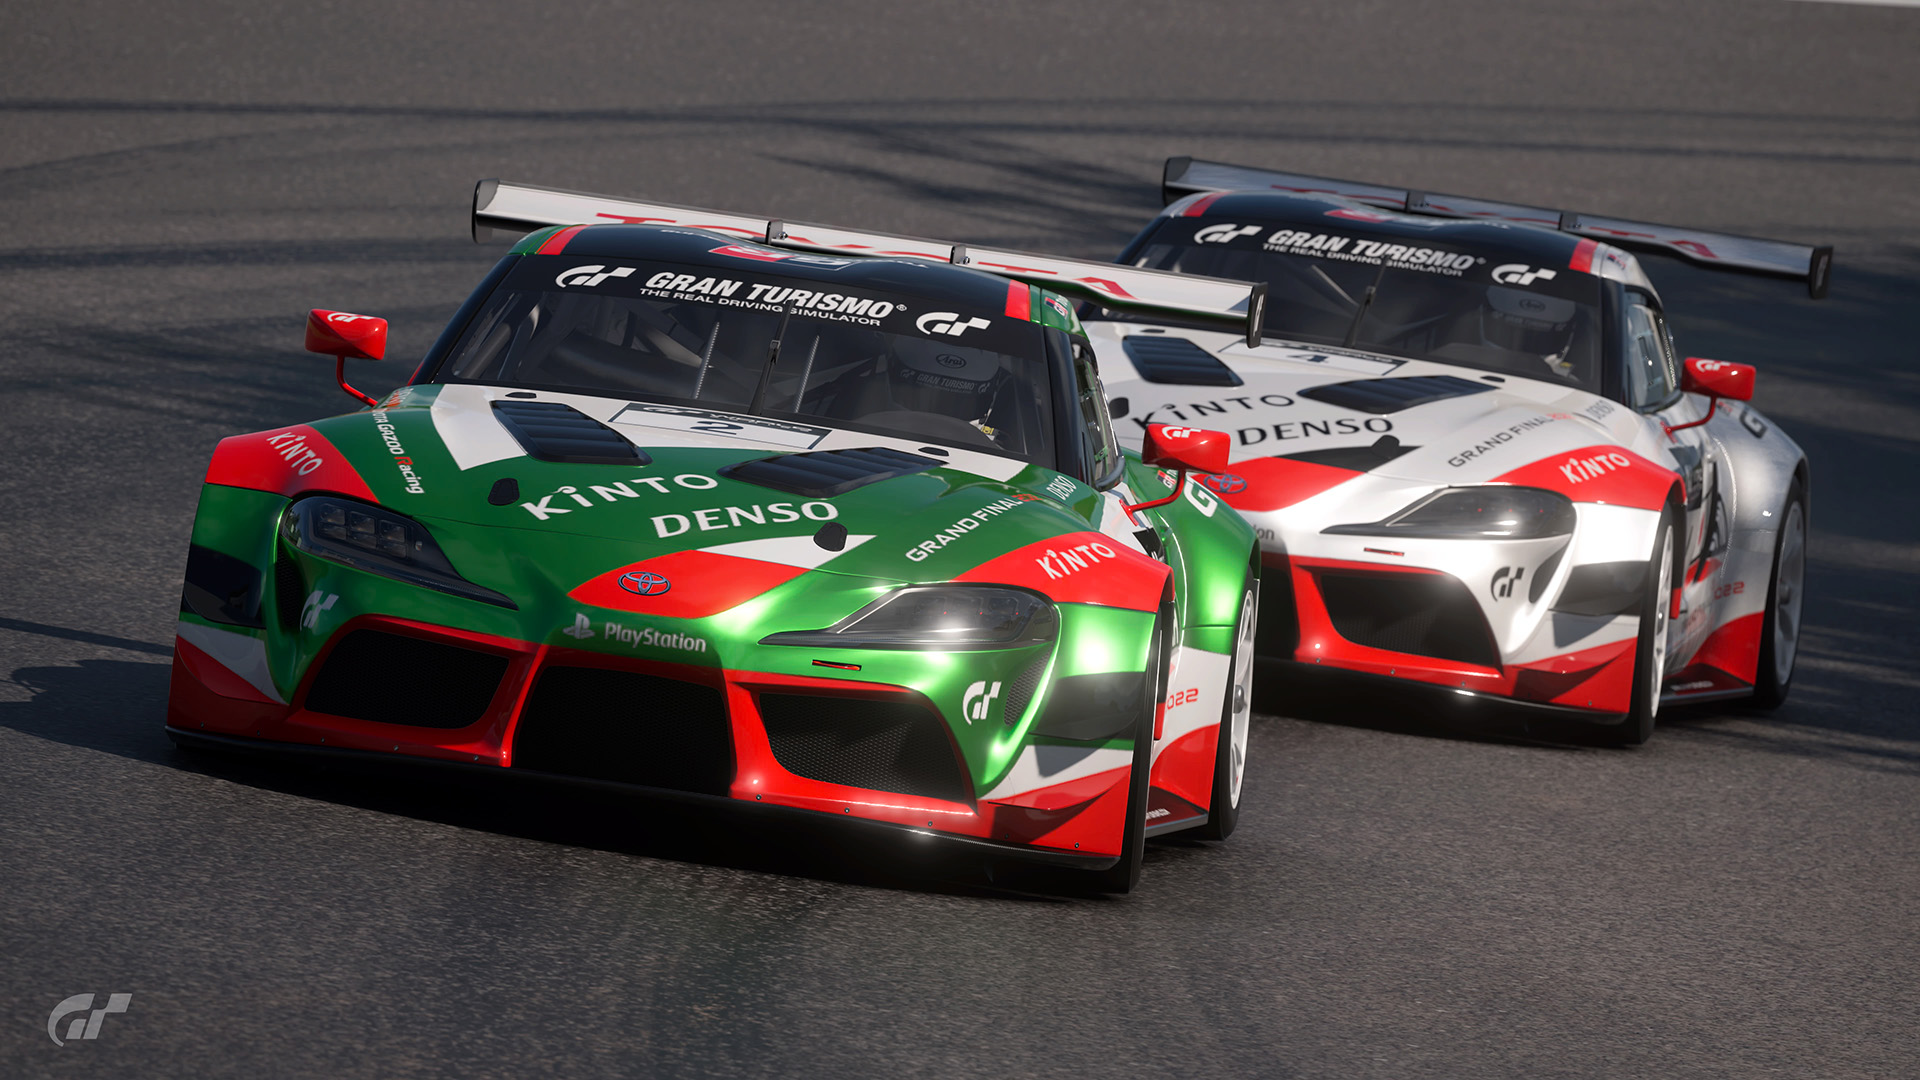 TOYOTA GAZOO Racing announces the outline of TGR GT Cup 2022